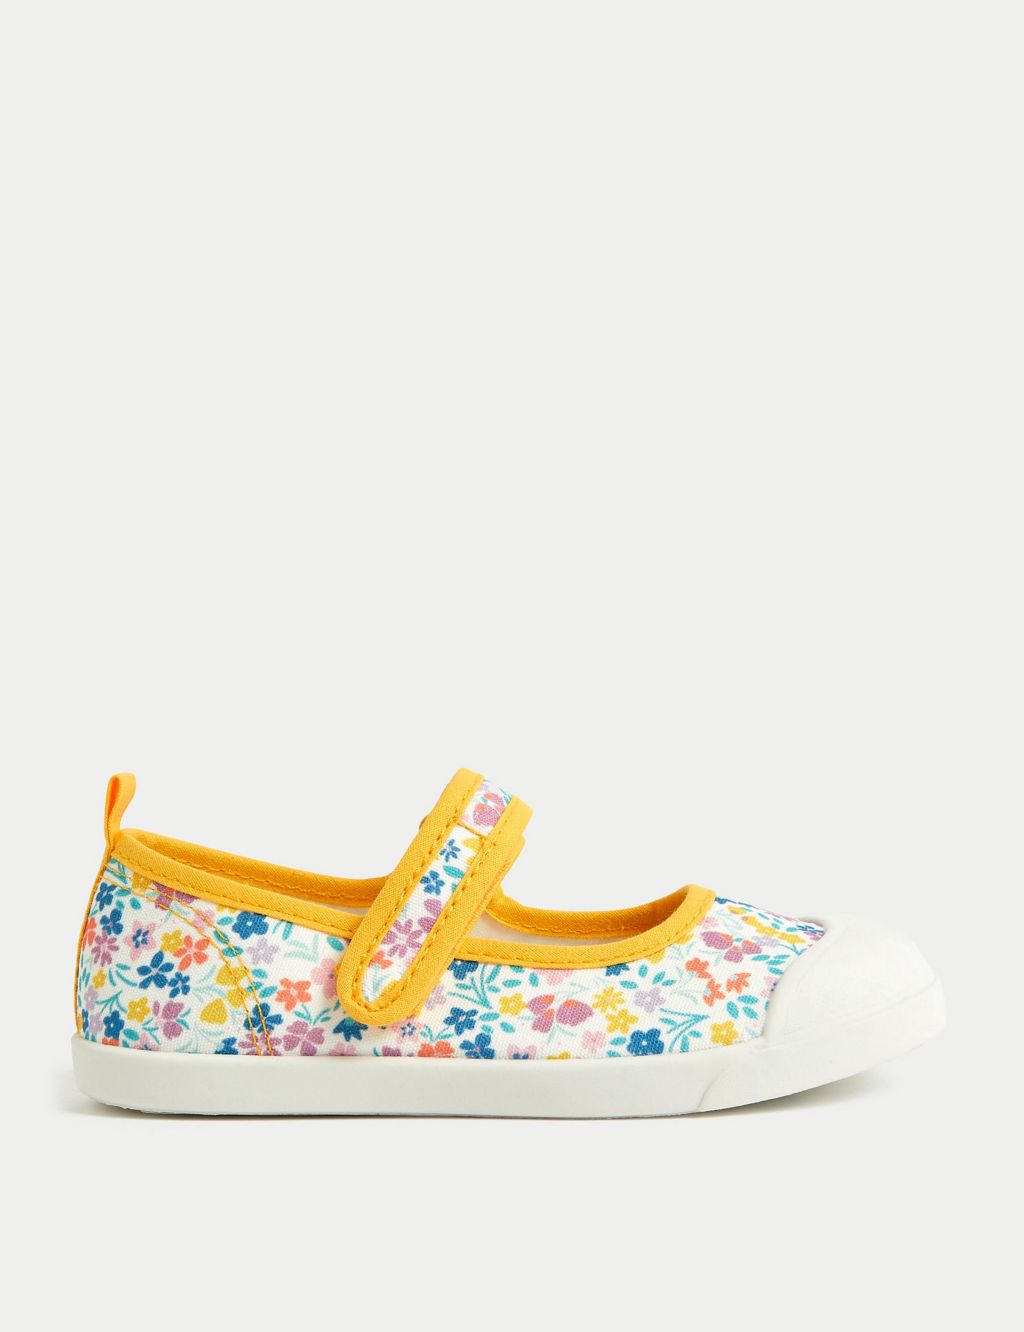 Kids' Floral Mary Jane Pumps (4 Small - 2 Large) image 1